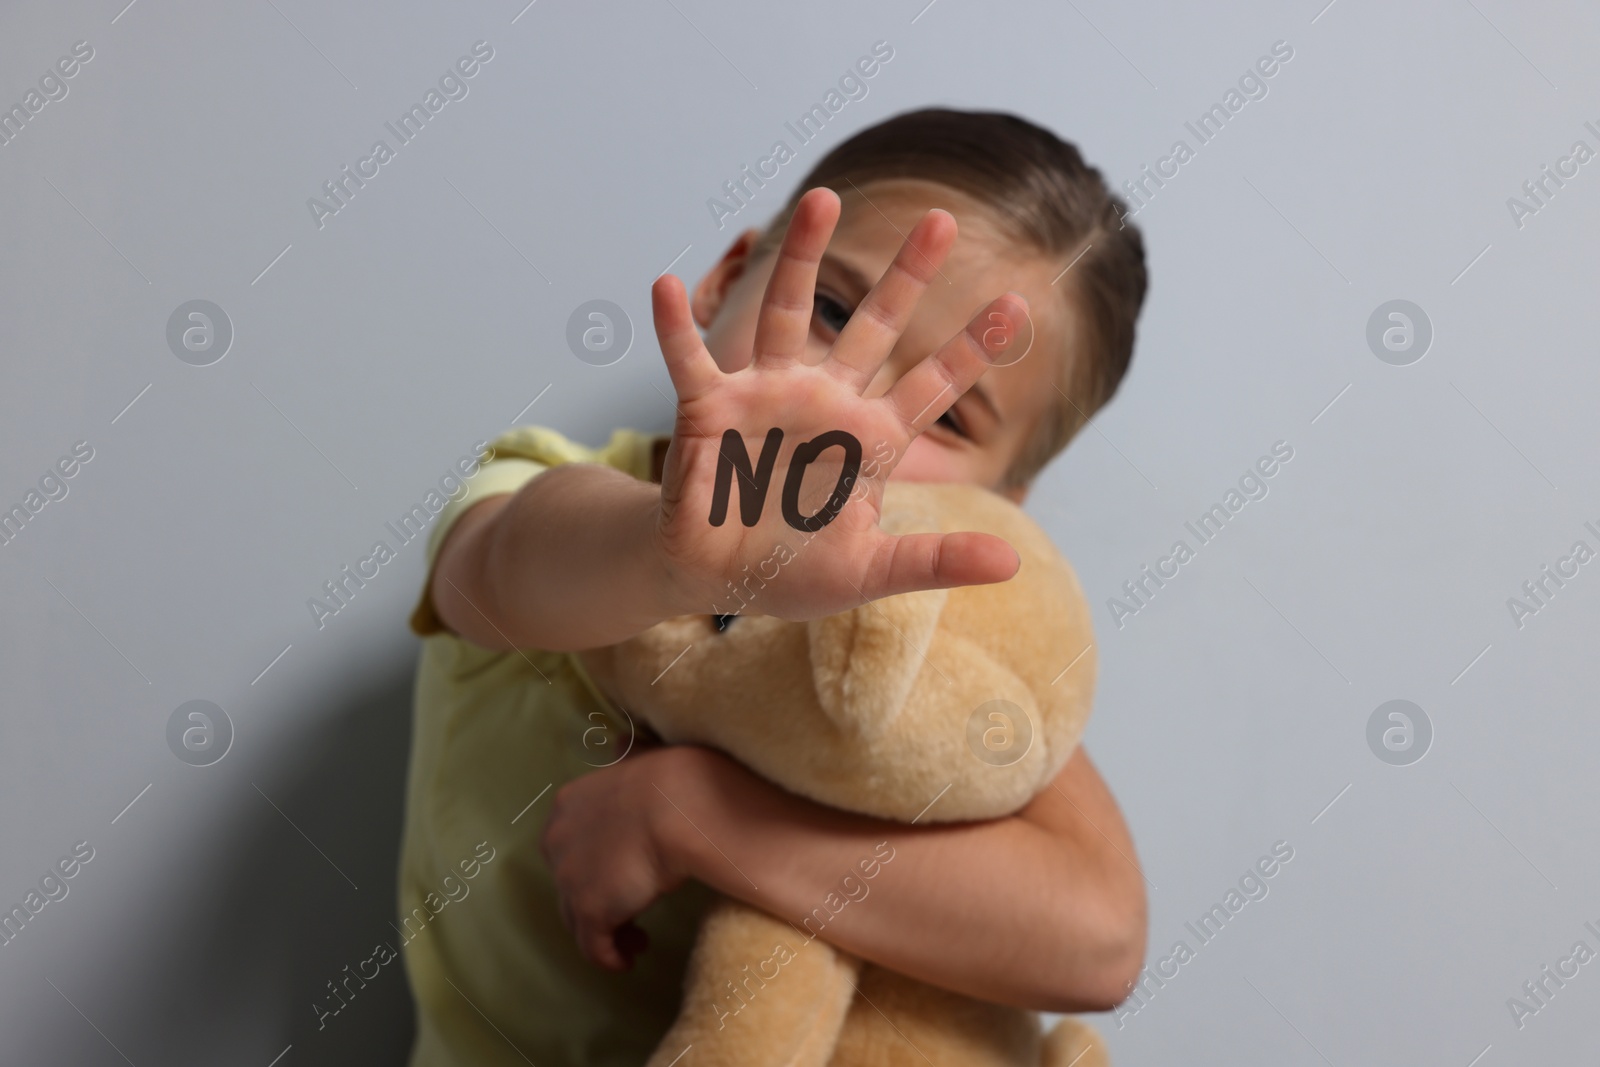 Image of Child abuse. Girl with toy making stop gesture near grey wall, selective focus. No written on her hand